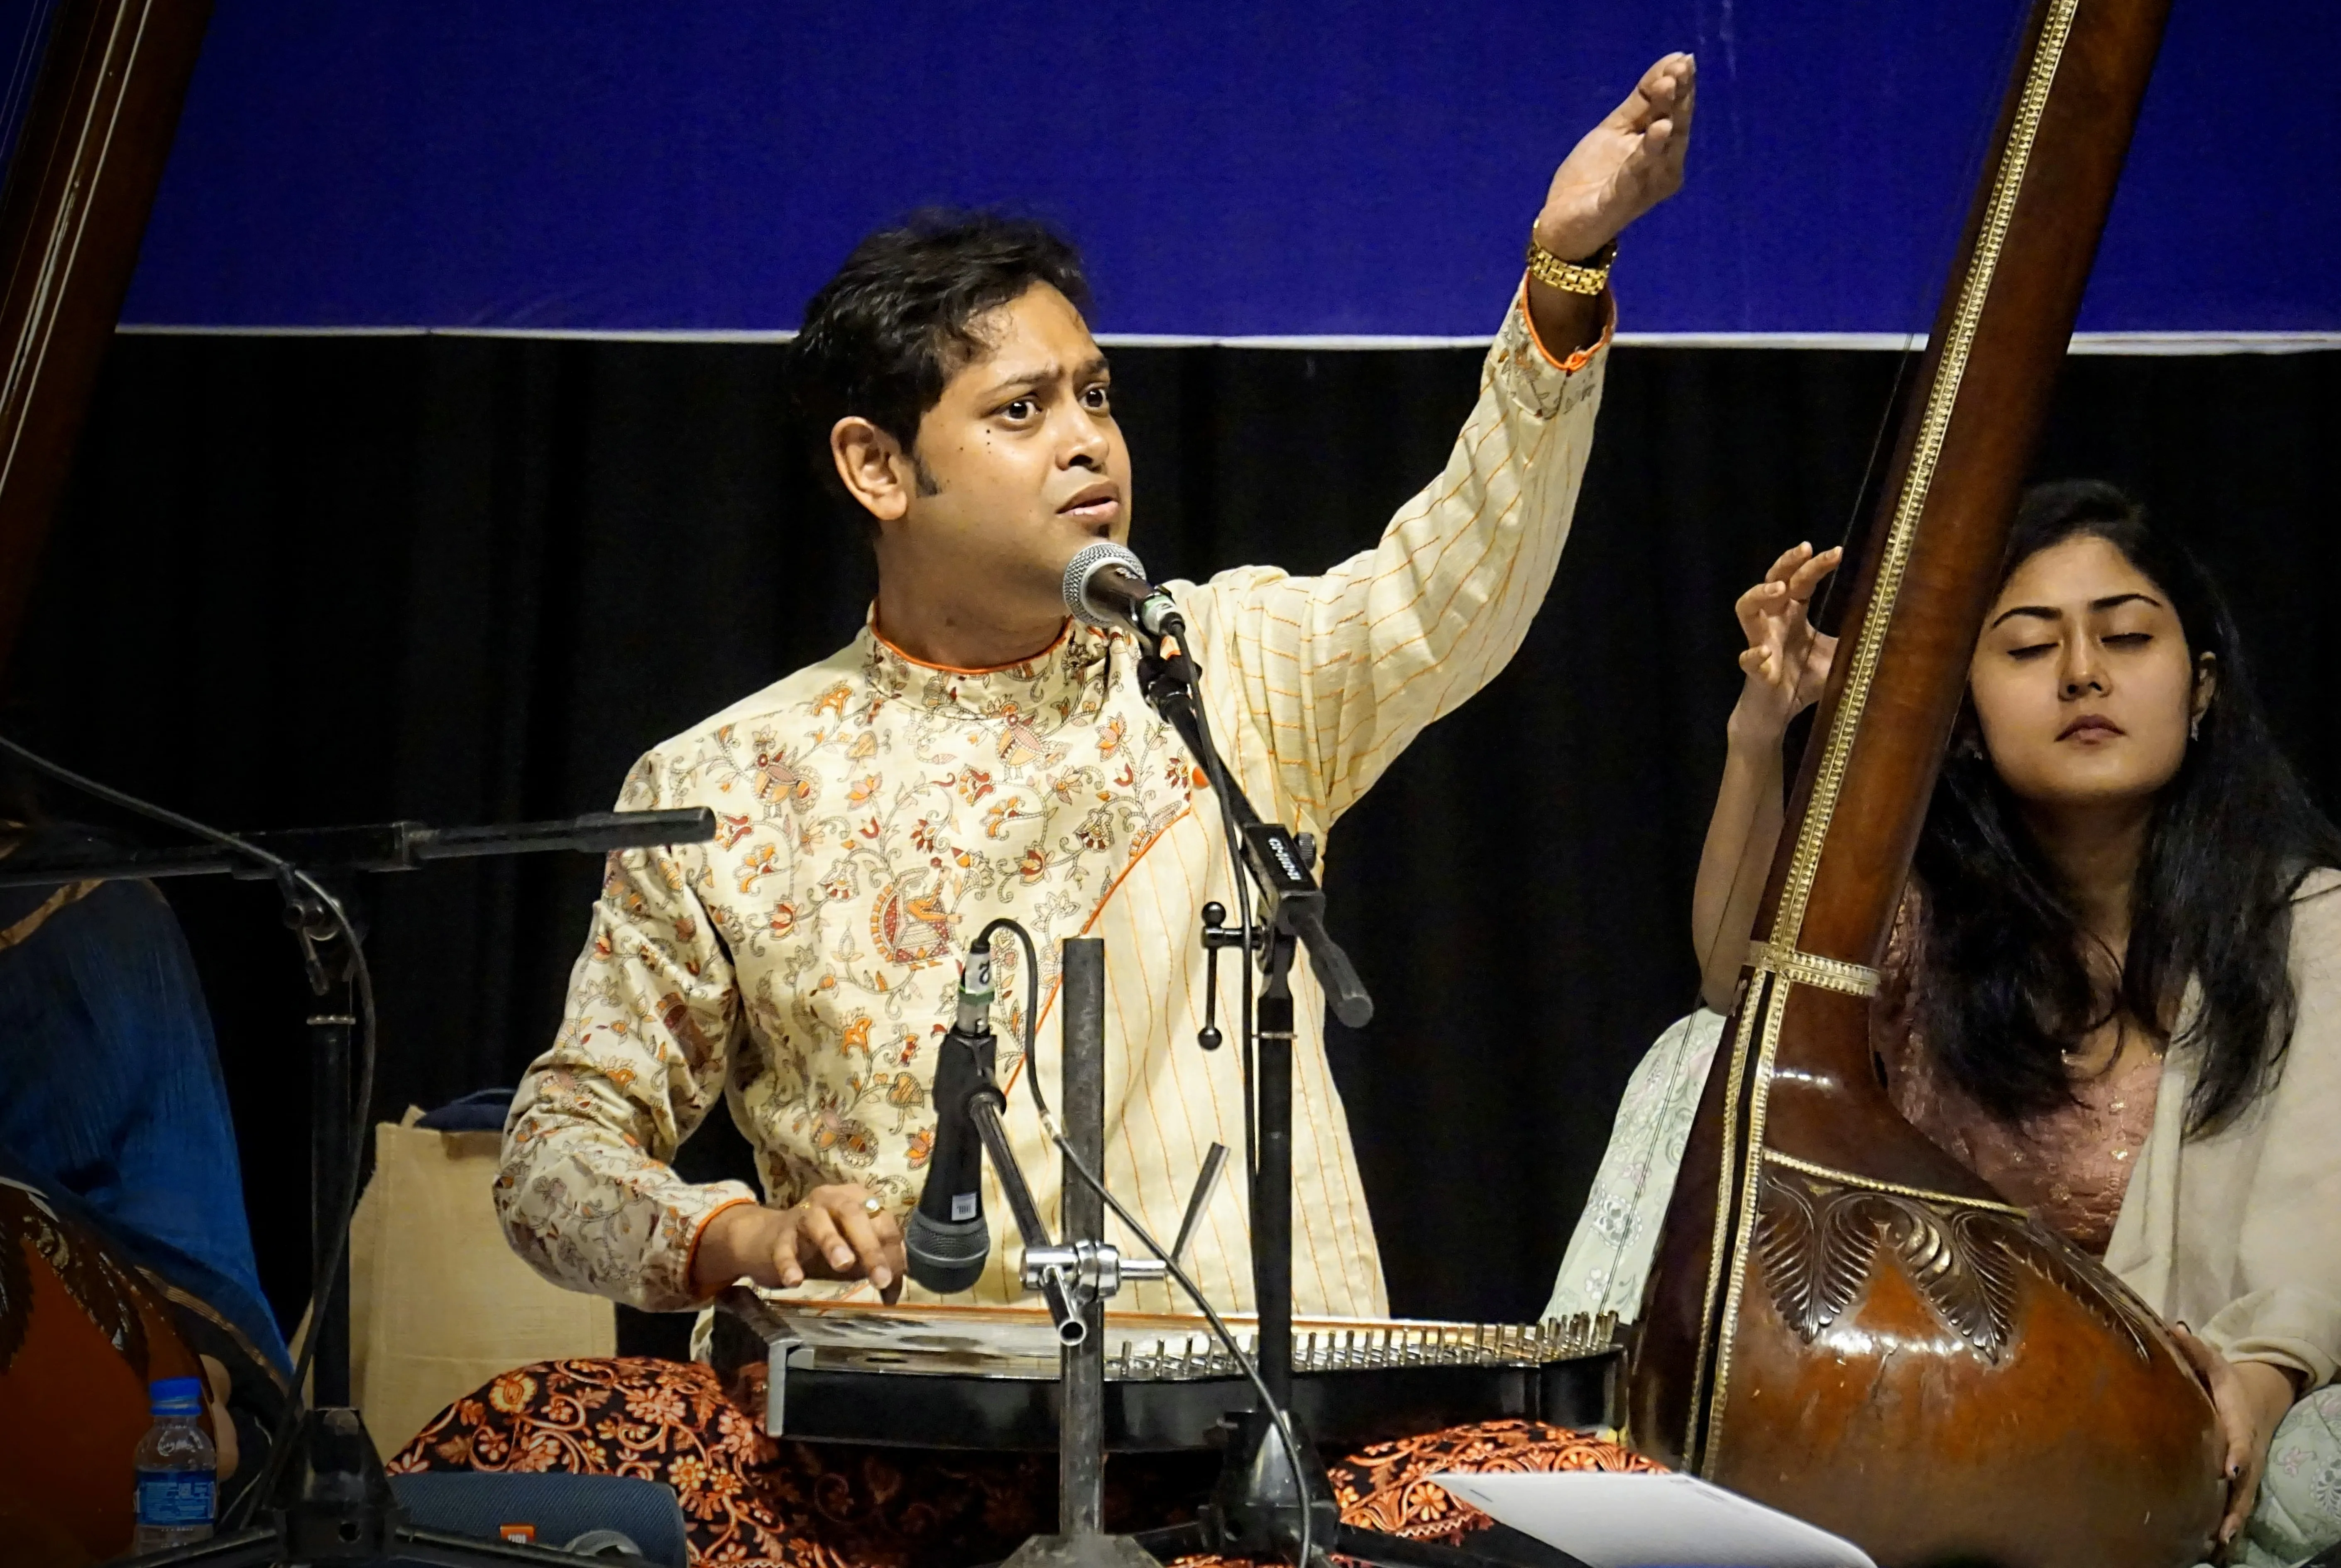 Level up to Professional Stage of Hindustani Classical Music by Deborshee Bhattacharjee